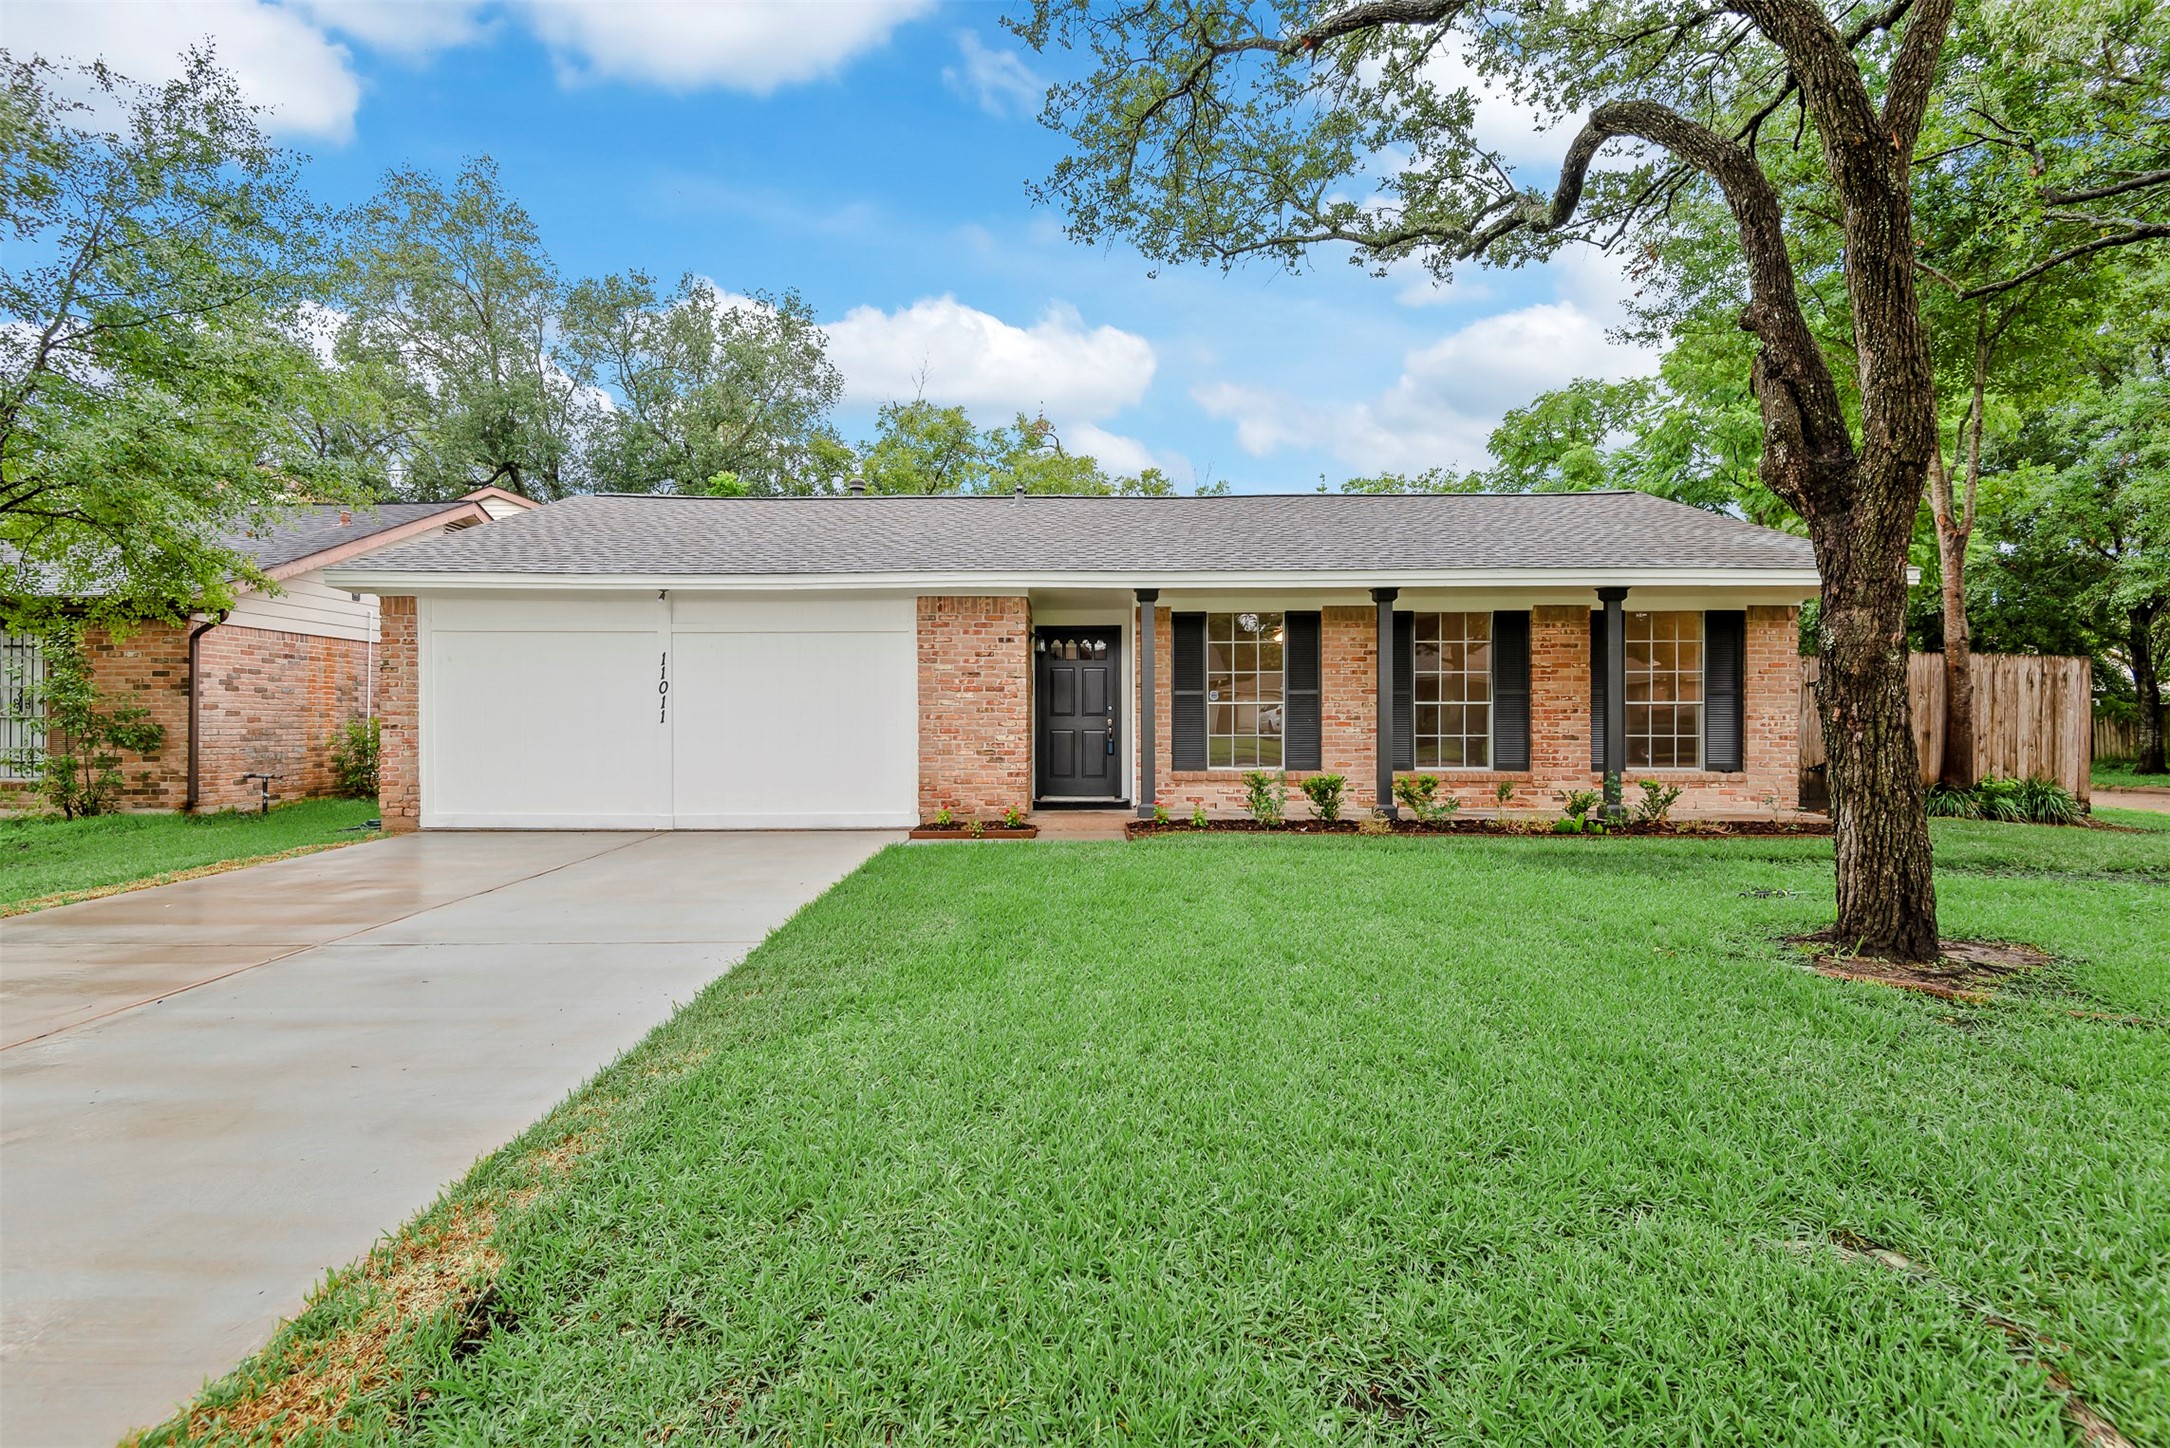 New driveway, grass and exterior paint. - If you have additional questions regarding 11011 Sagewillow Lane  in Houston or would like to tour the property with us call 800-660-1022 and reference MLS# 93340690.